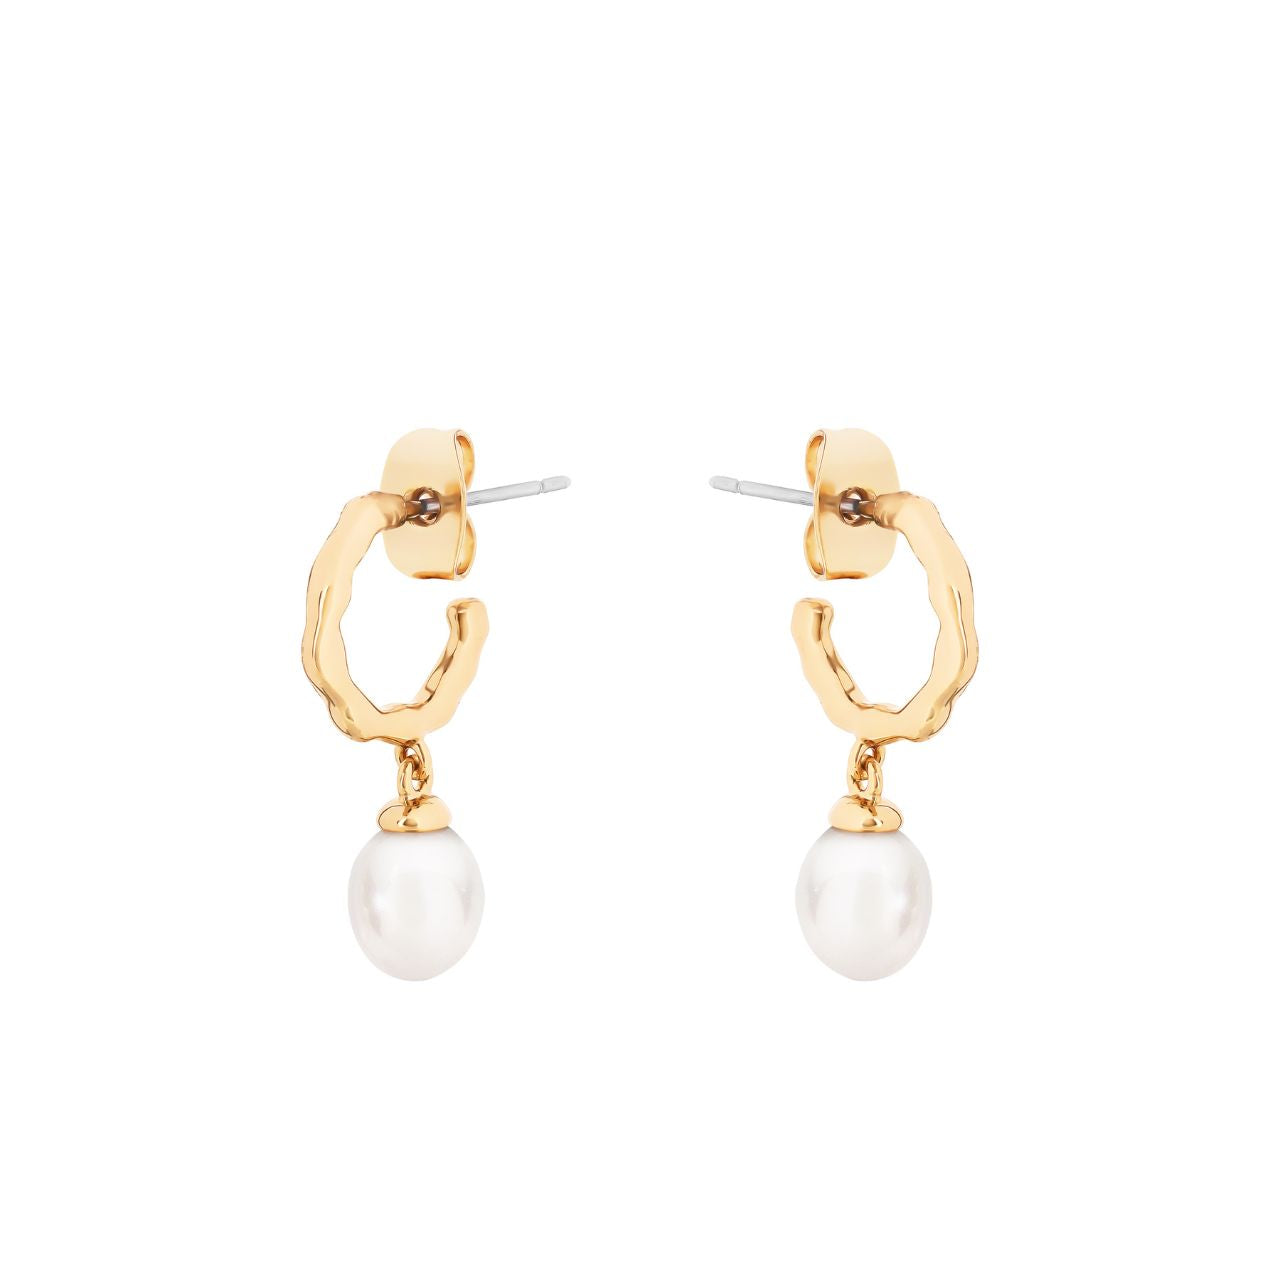 Expertly crafted, the Tipperary Natural Pearl Hoop Earrings in gold are a timeless addition to any jewellery collection. The natural pearl accents add a touch of elegance, while the sturdy gold hoops provide durability. Elevate any outfit with these versatile and sophisticated earrings.